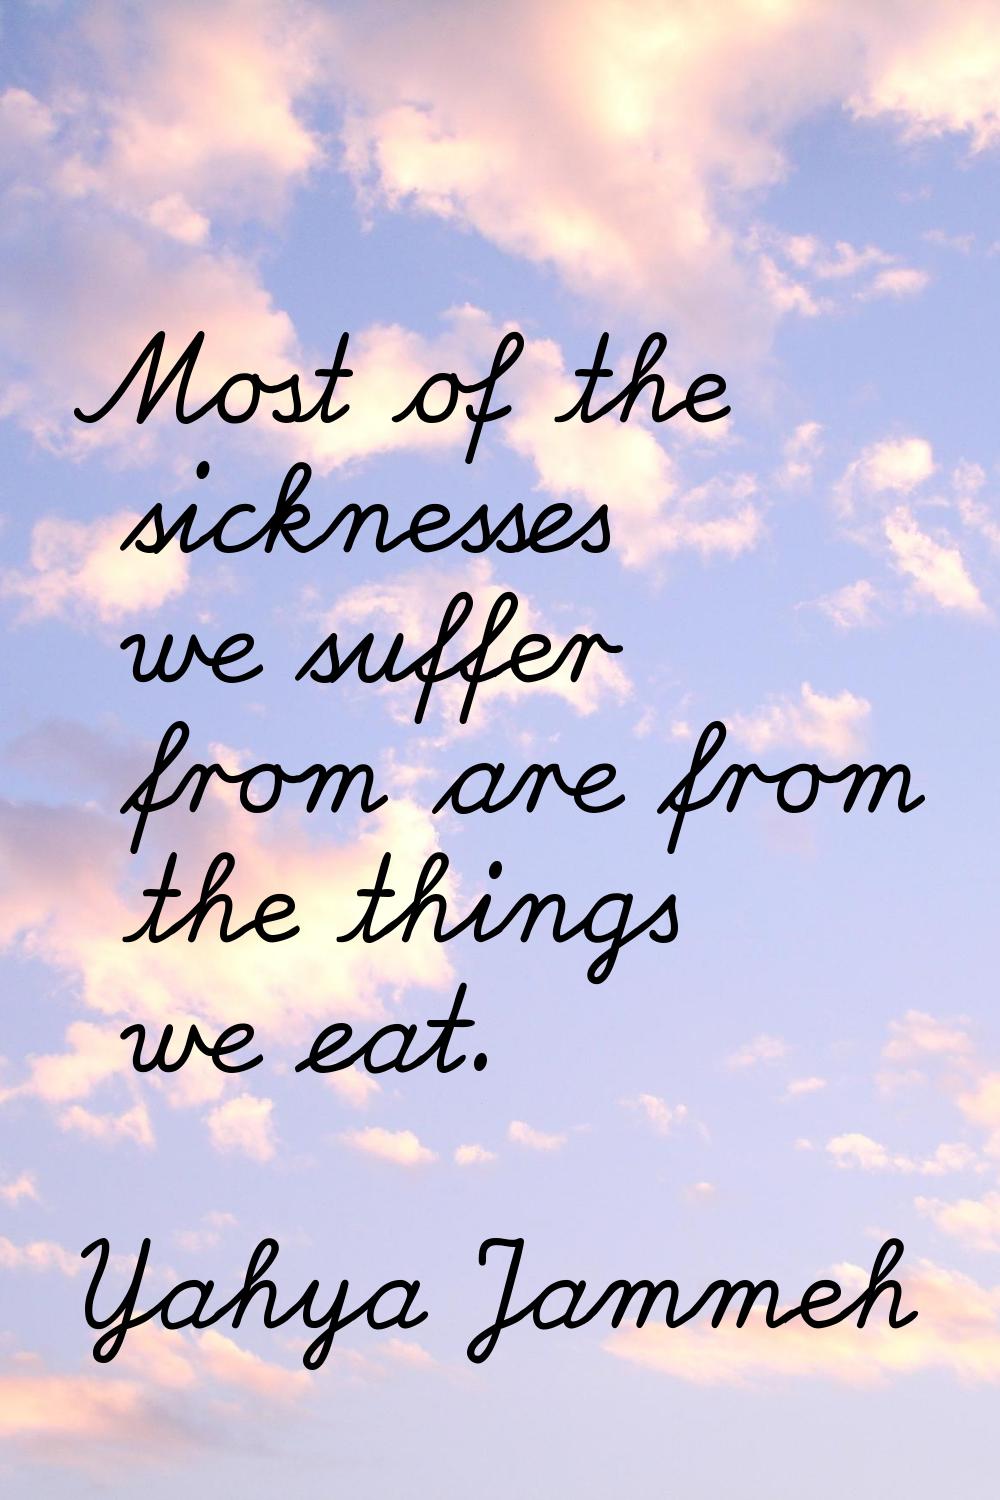 Most of the sicknesses we suffer from are from the things we eat.